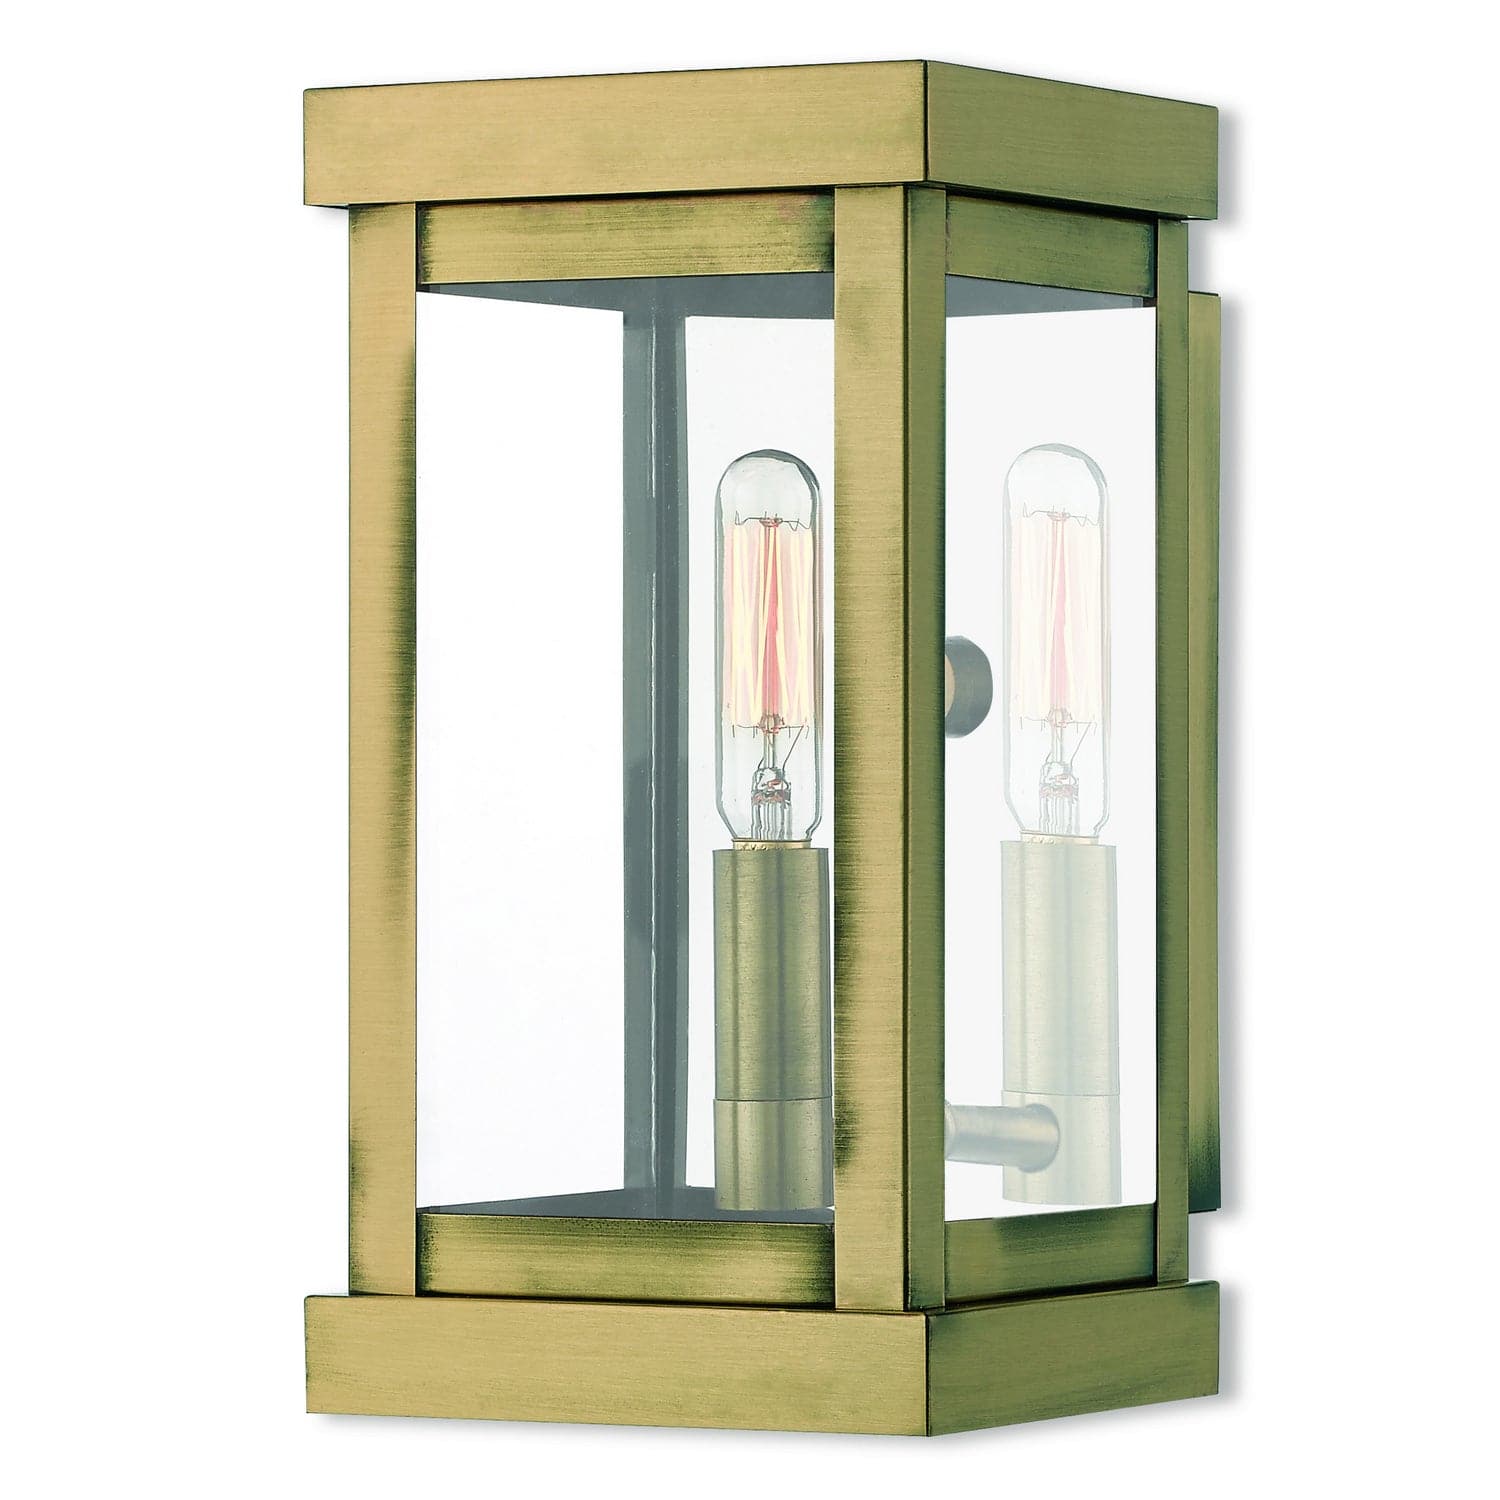 Livex Lighting - 20701-01 - One Light Outdoor Wall Lantern - Hopewell - Antique Brass w/ Polished Chrome Stainless Steel